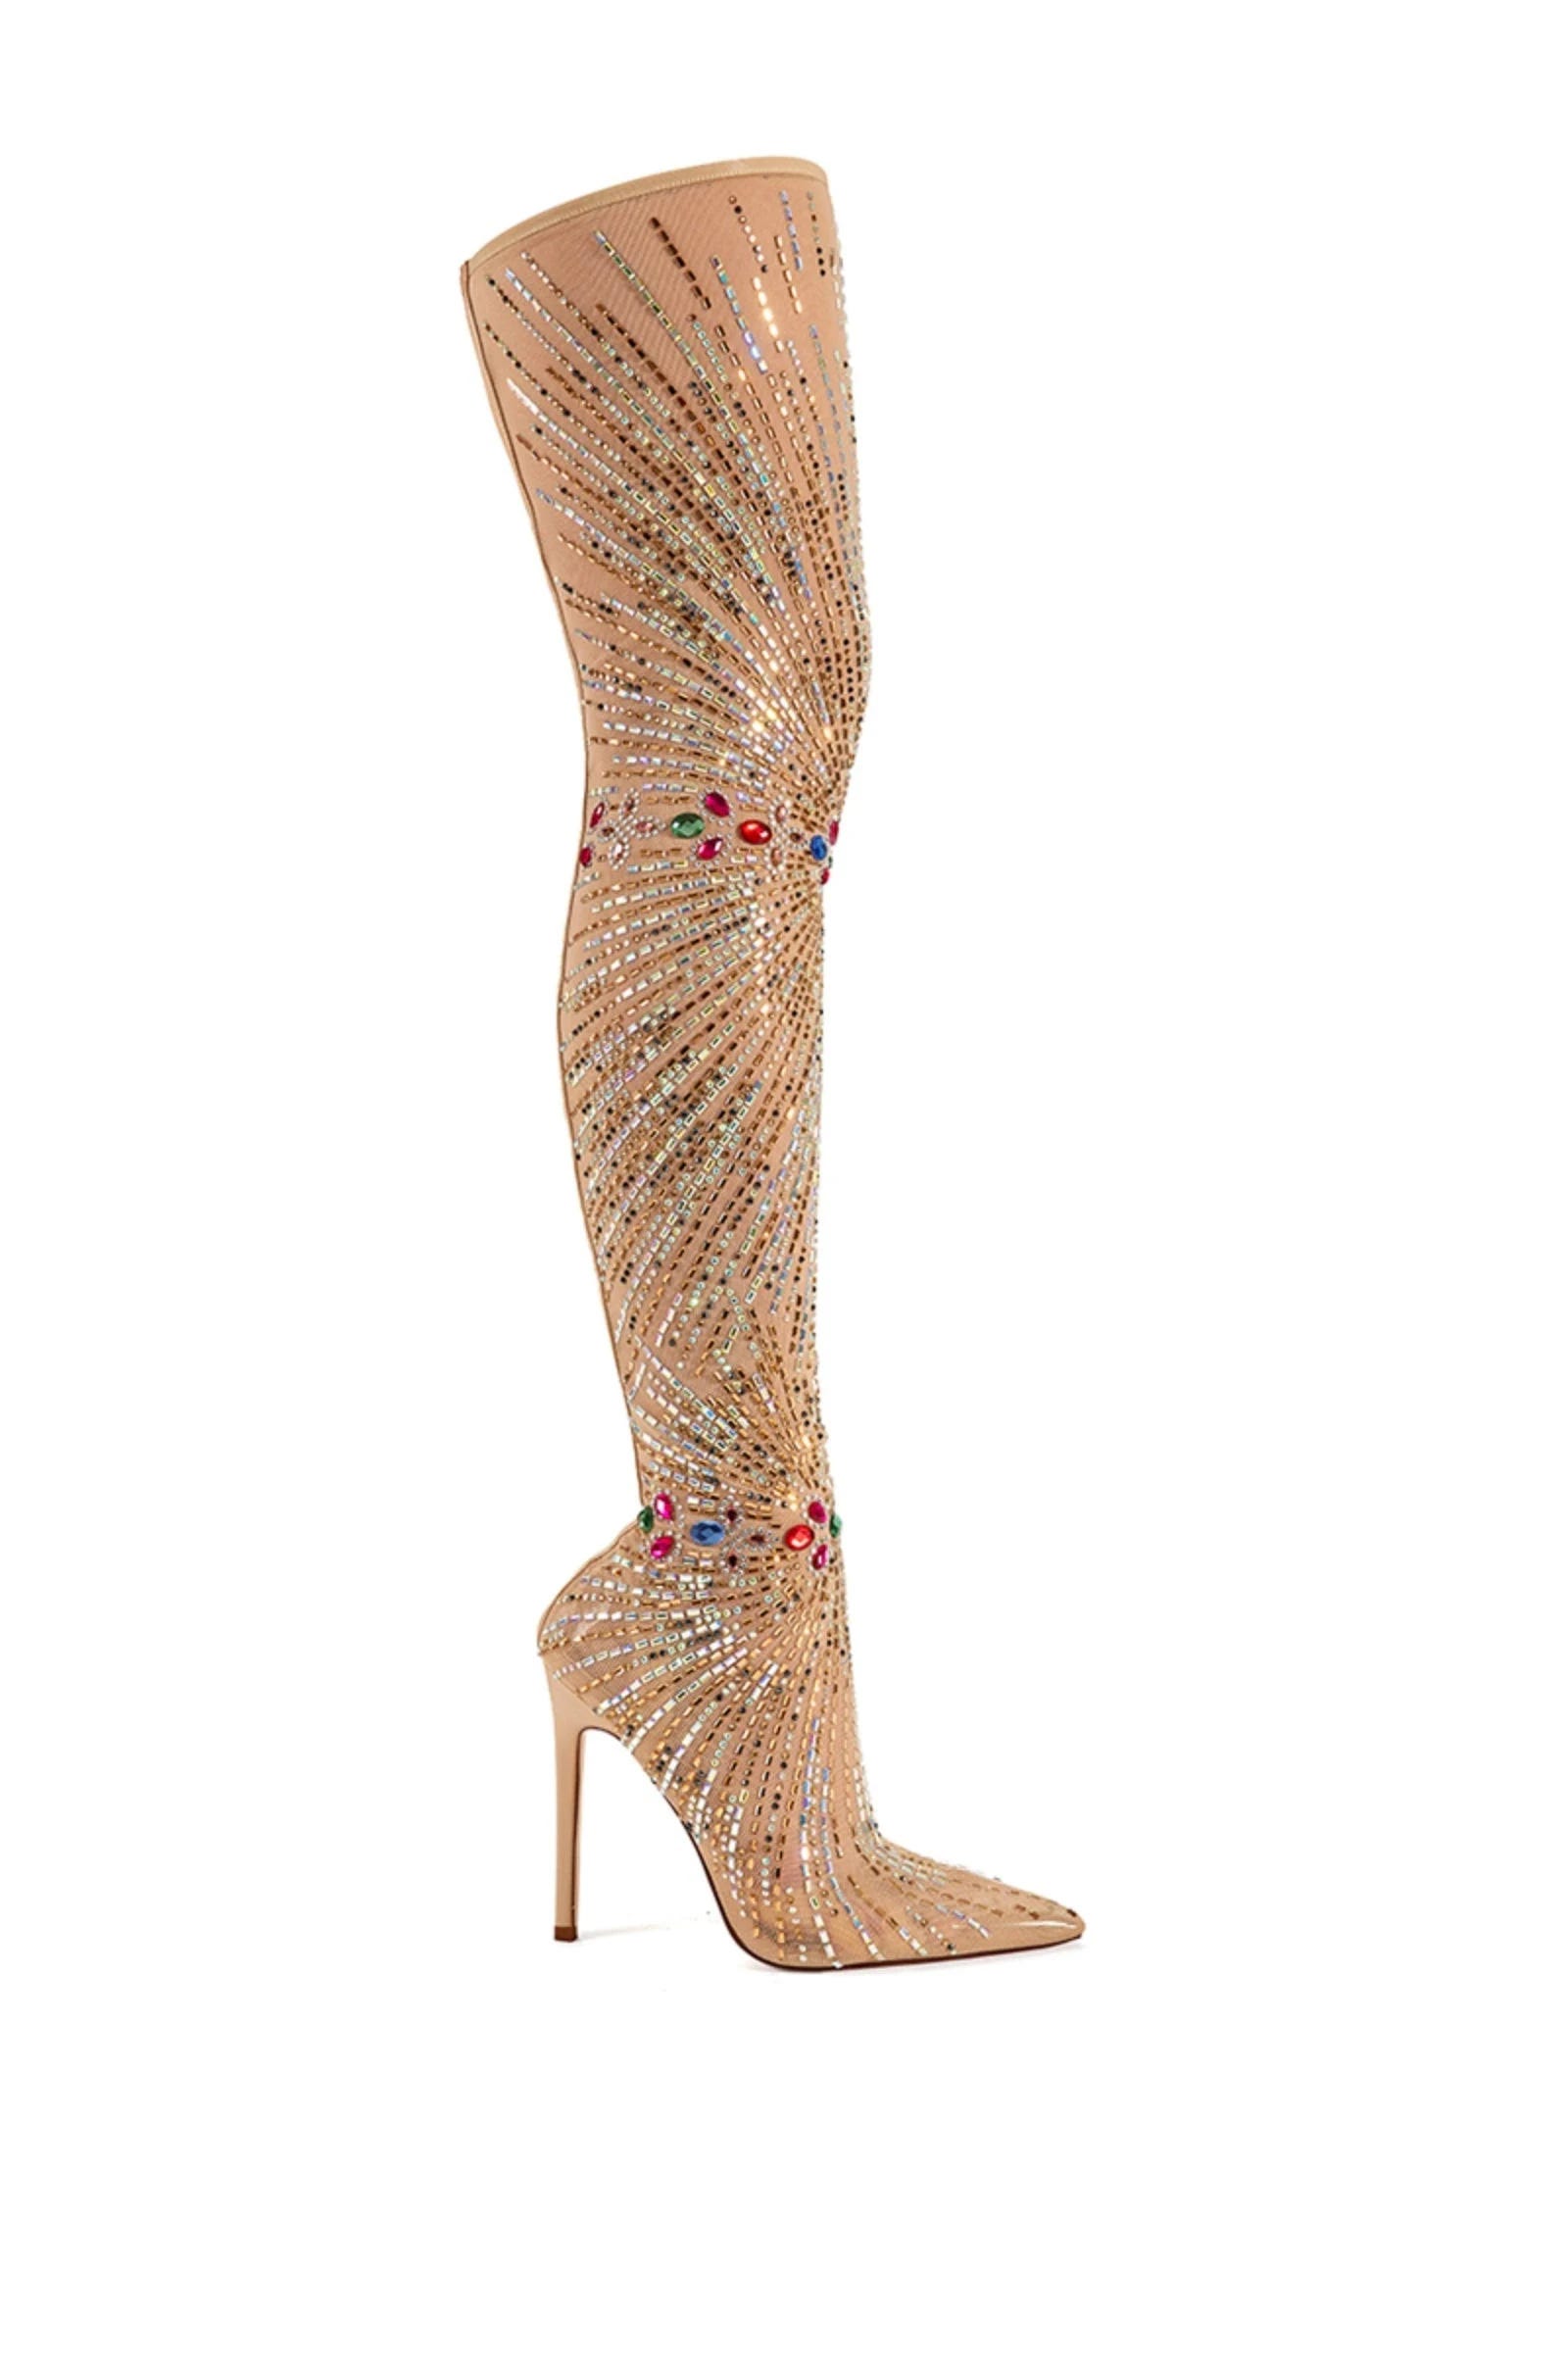 Crystal Rhinestone Thigh-High Dress Boots with Mesh Accents | Image